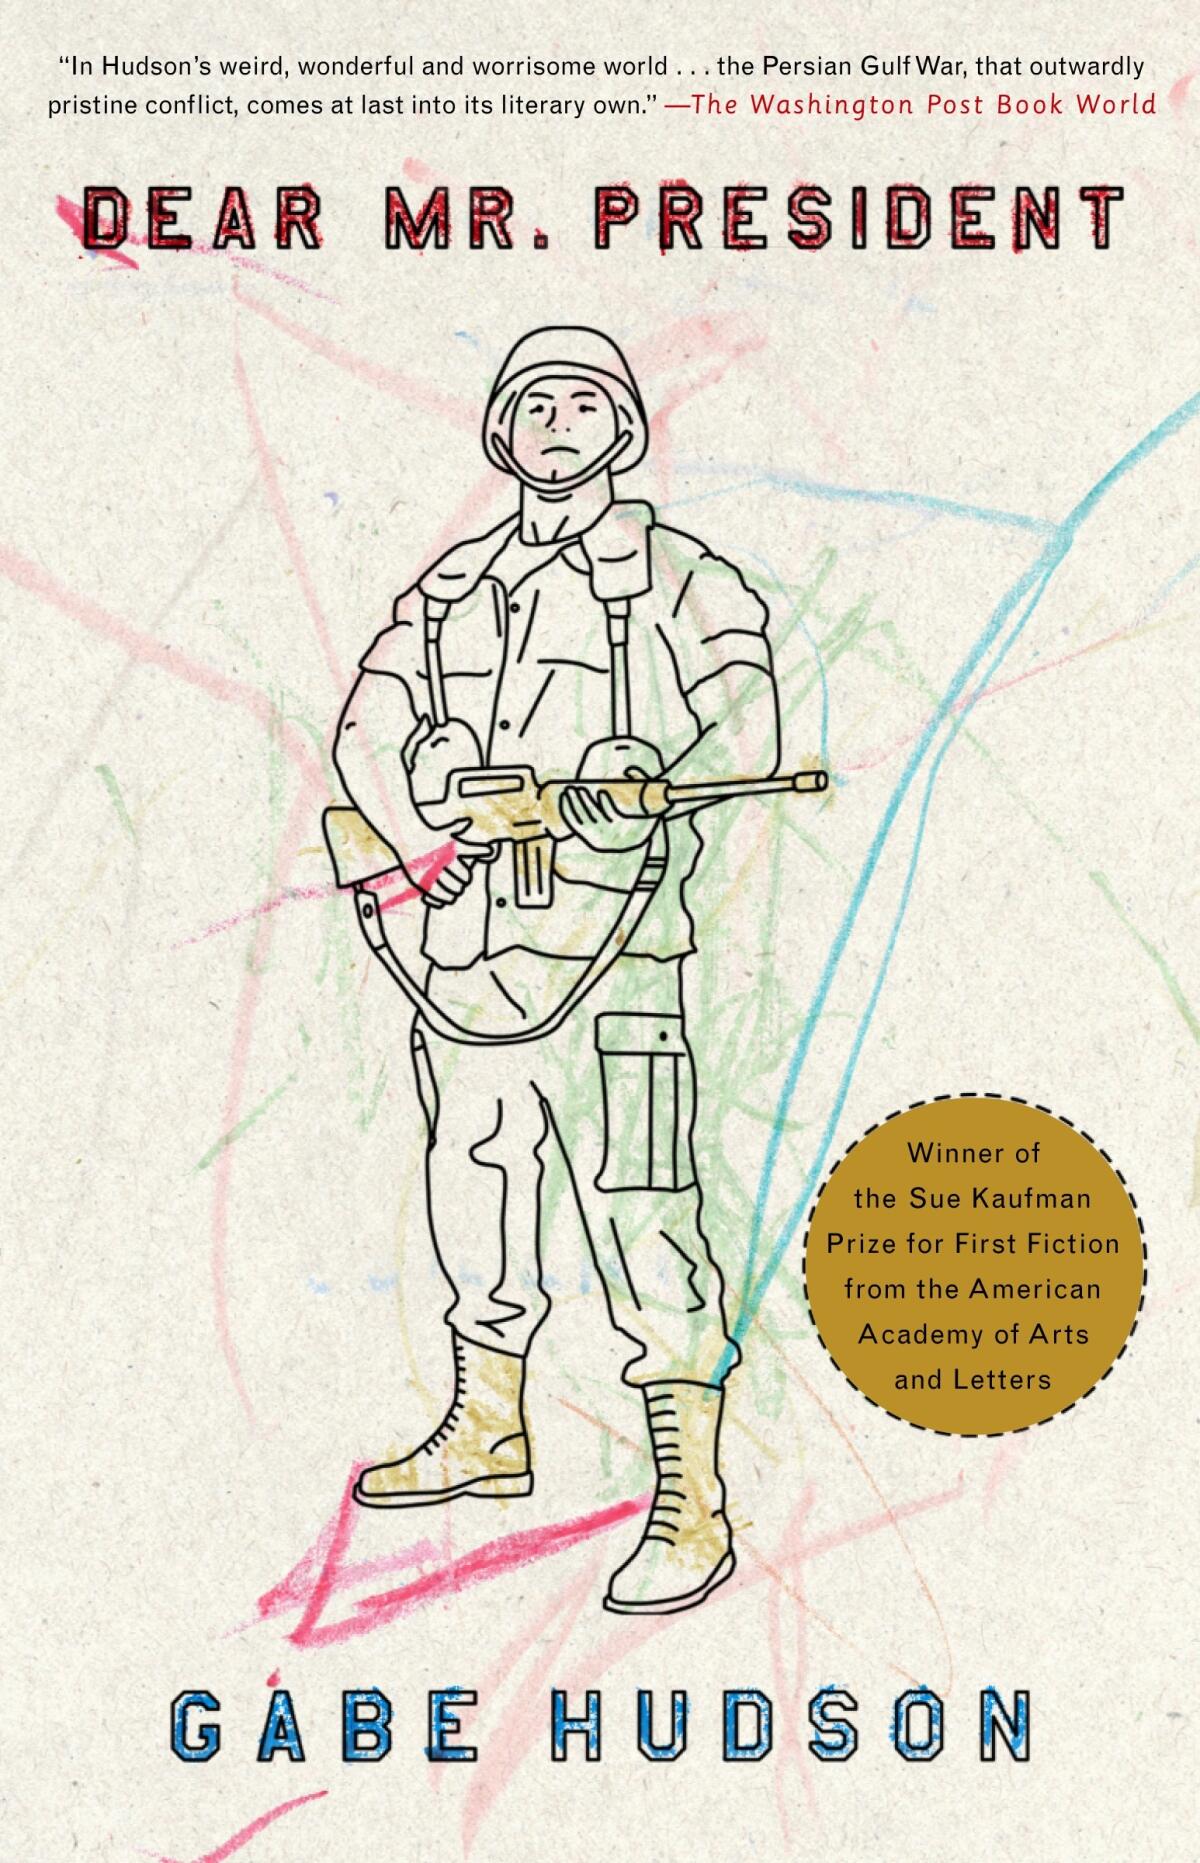 The cover of "Dear Mr. President," by Gabe Hudson, with a drawing of a soldier in uniform holding a rifle